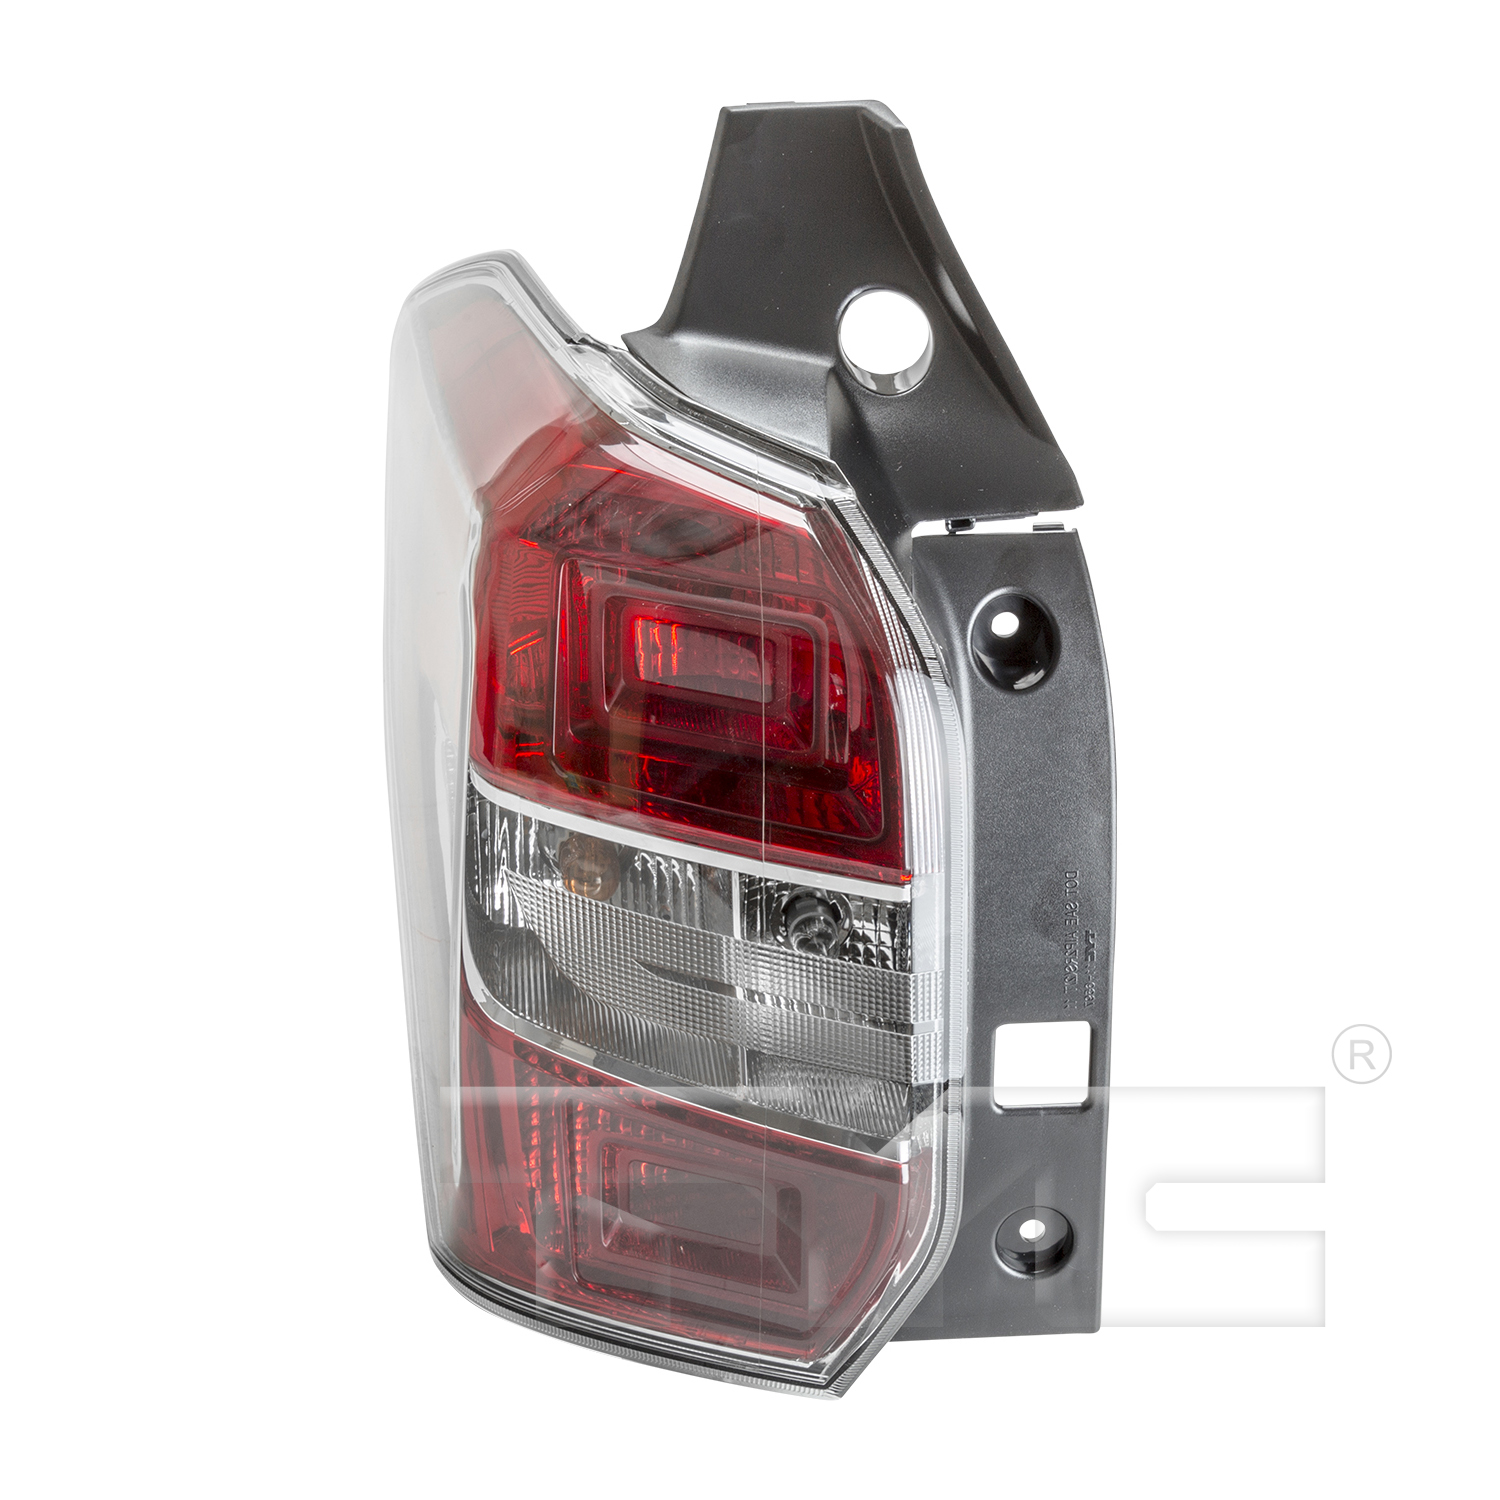 Aftermarket TAILLIGHTS for SUBARU - FORESTER, FORESTER,14-16,LT Taillamp lens/housing